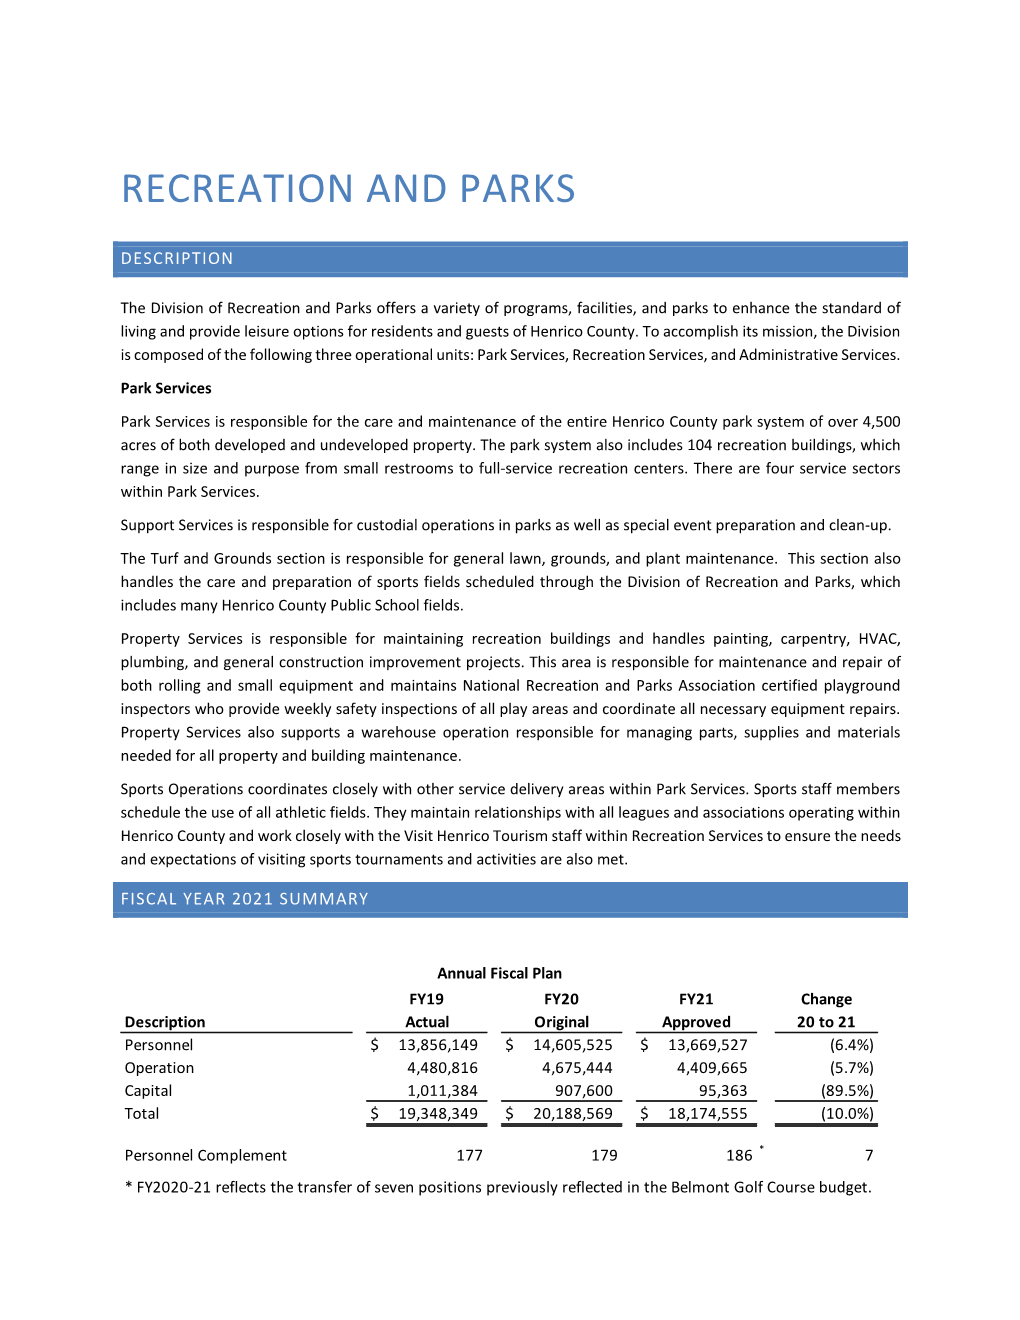 Recreation and Parks